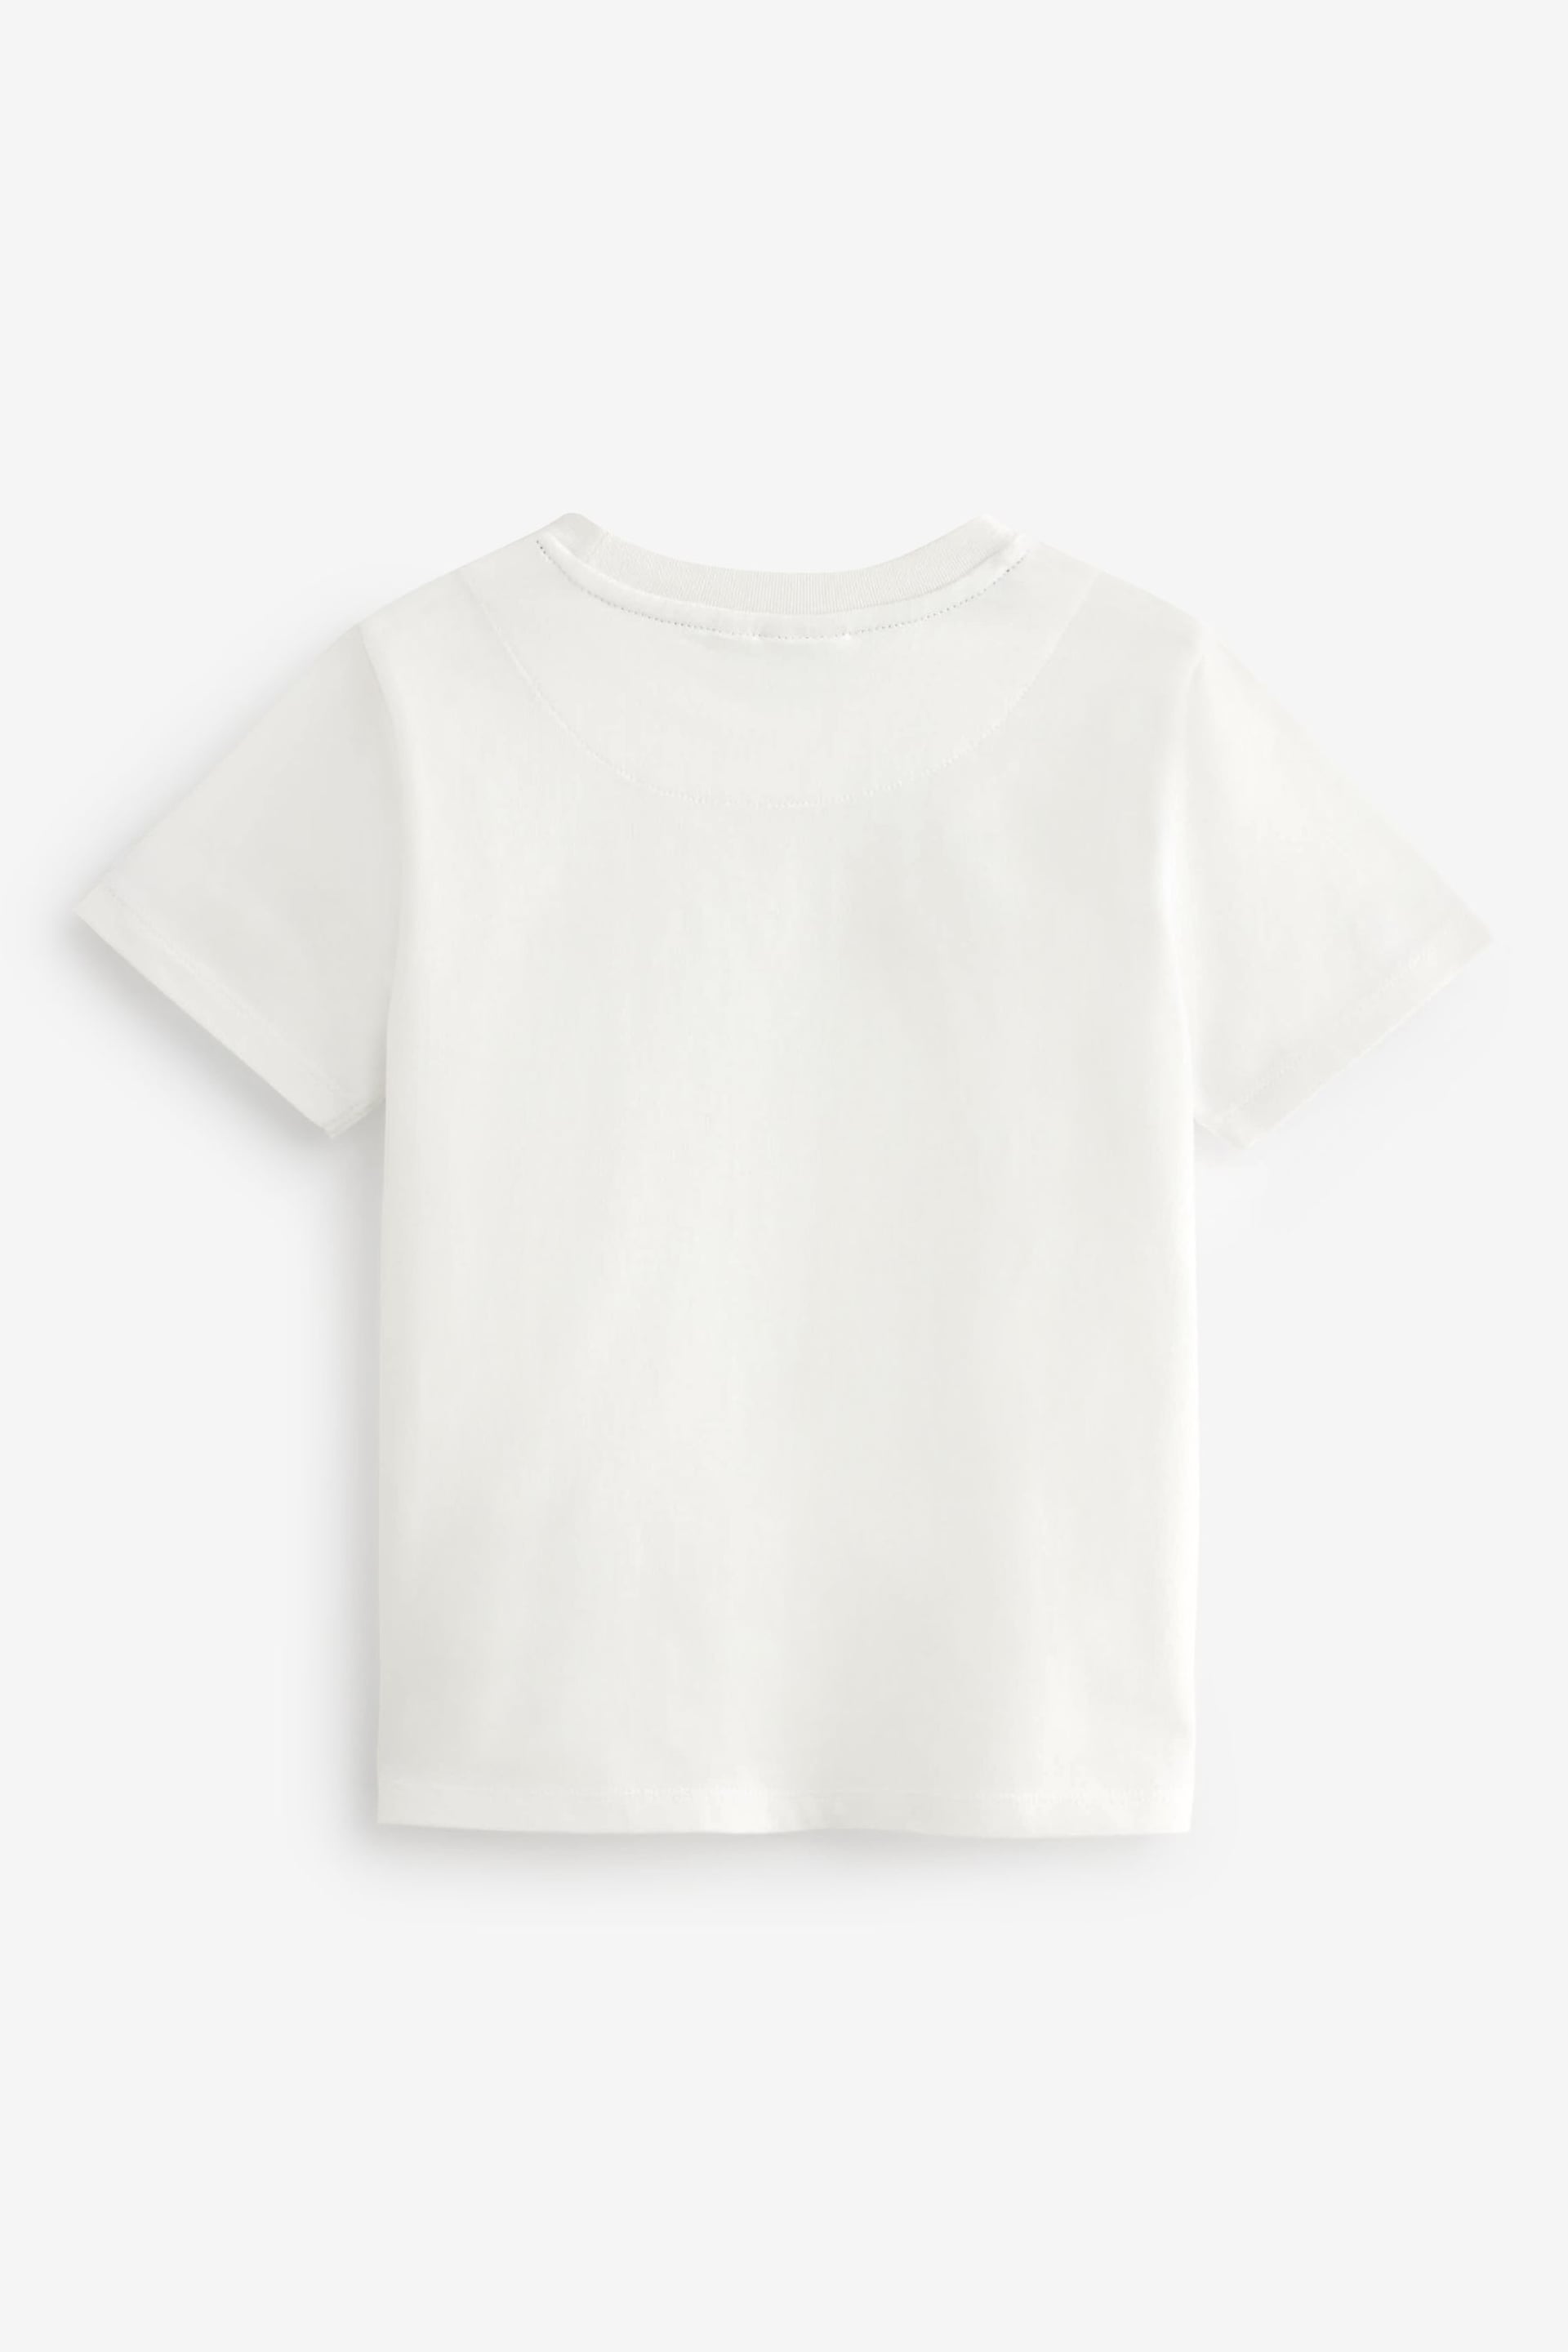 Baker by Ted Baker T-Shirt - Image 2 of 4